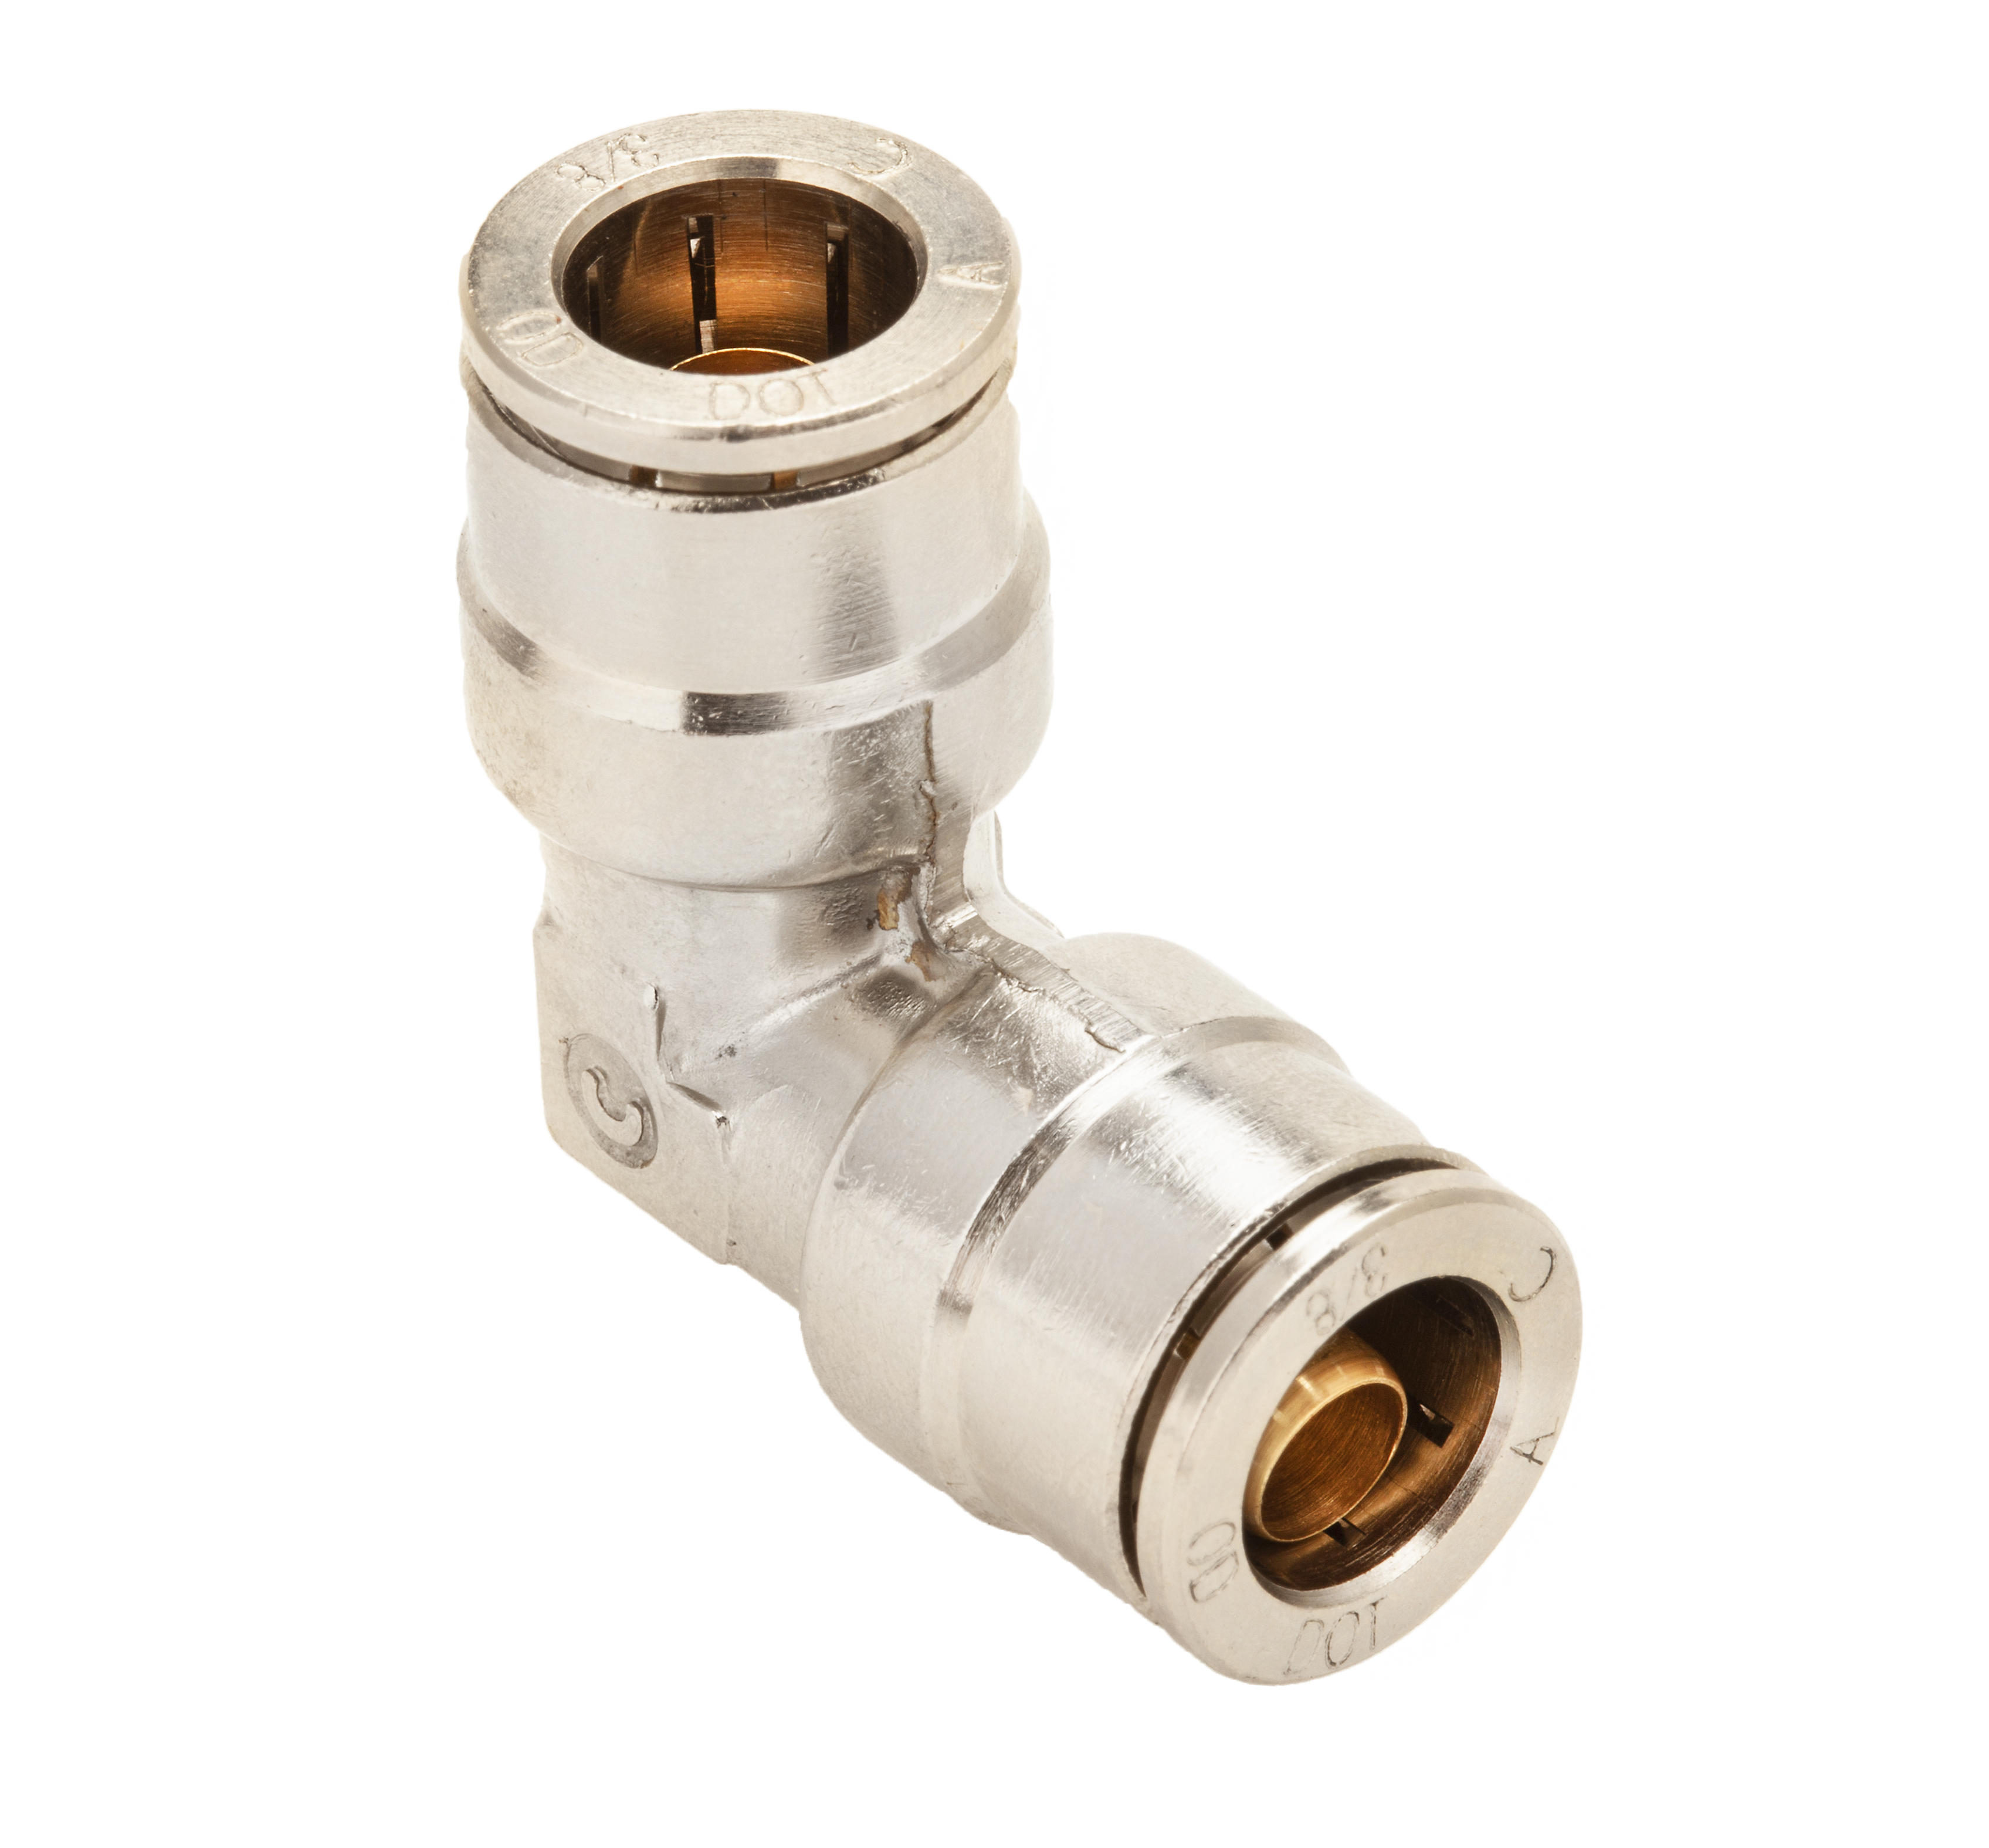 5/8 Parker 364PTC-10-pk5 Air Brake D.O.T Push-to-Connect Tee Composite Push-to-Connect Fitting PTC Pack of 5 Tube to Tube 